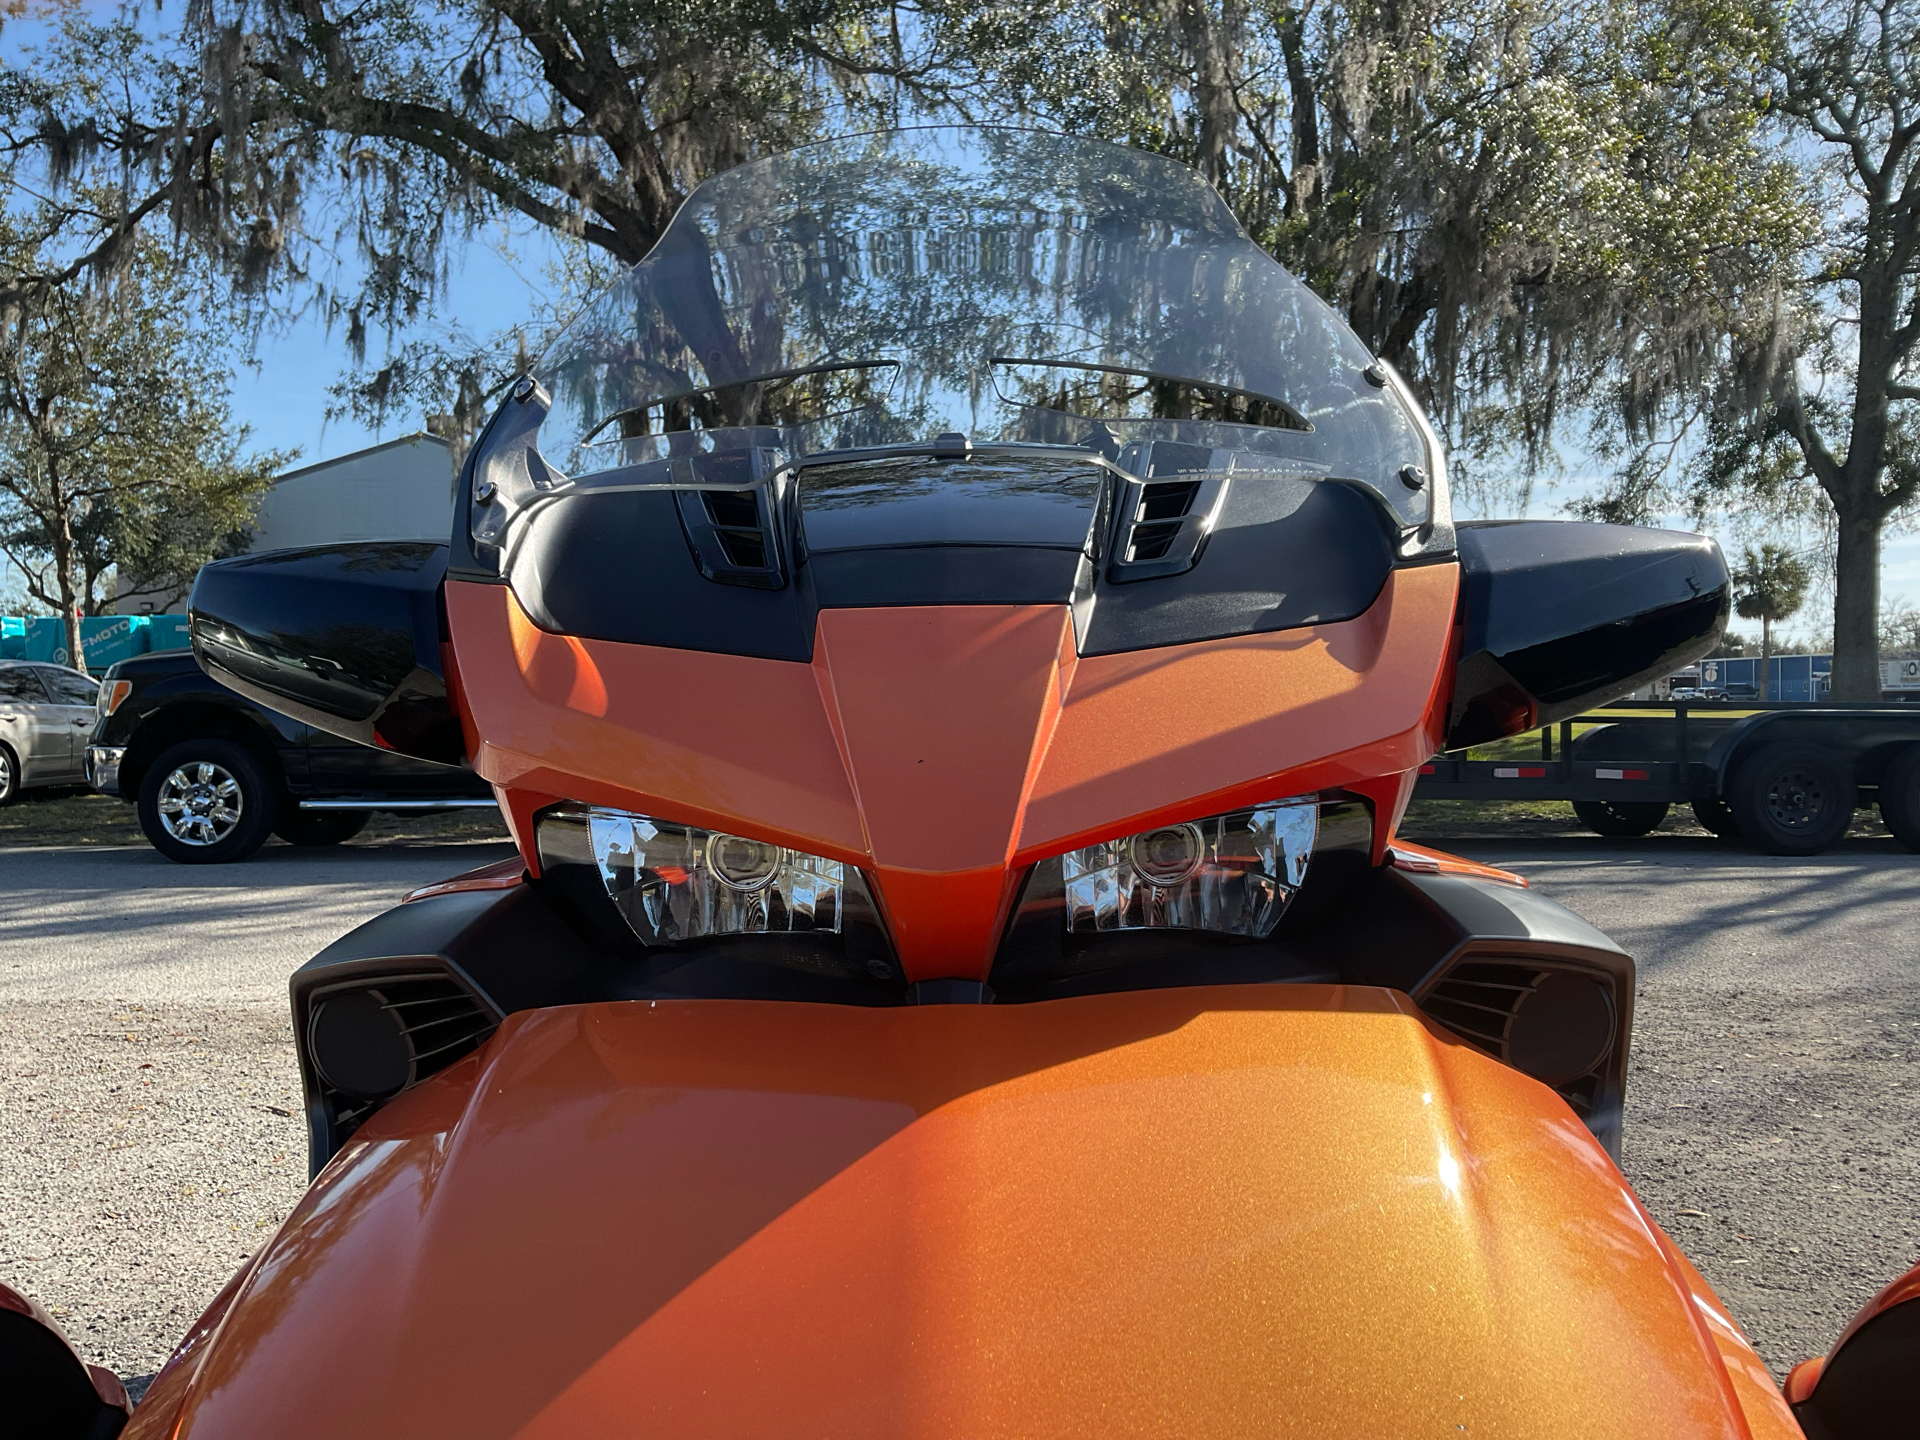 2019 Can-Am Spyder F3 Limited in Sanford, Florida - Photo 17